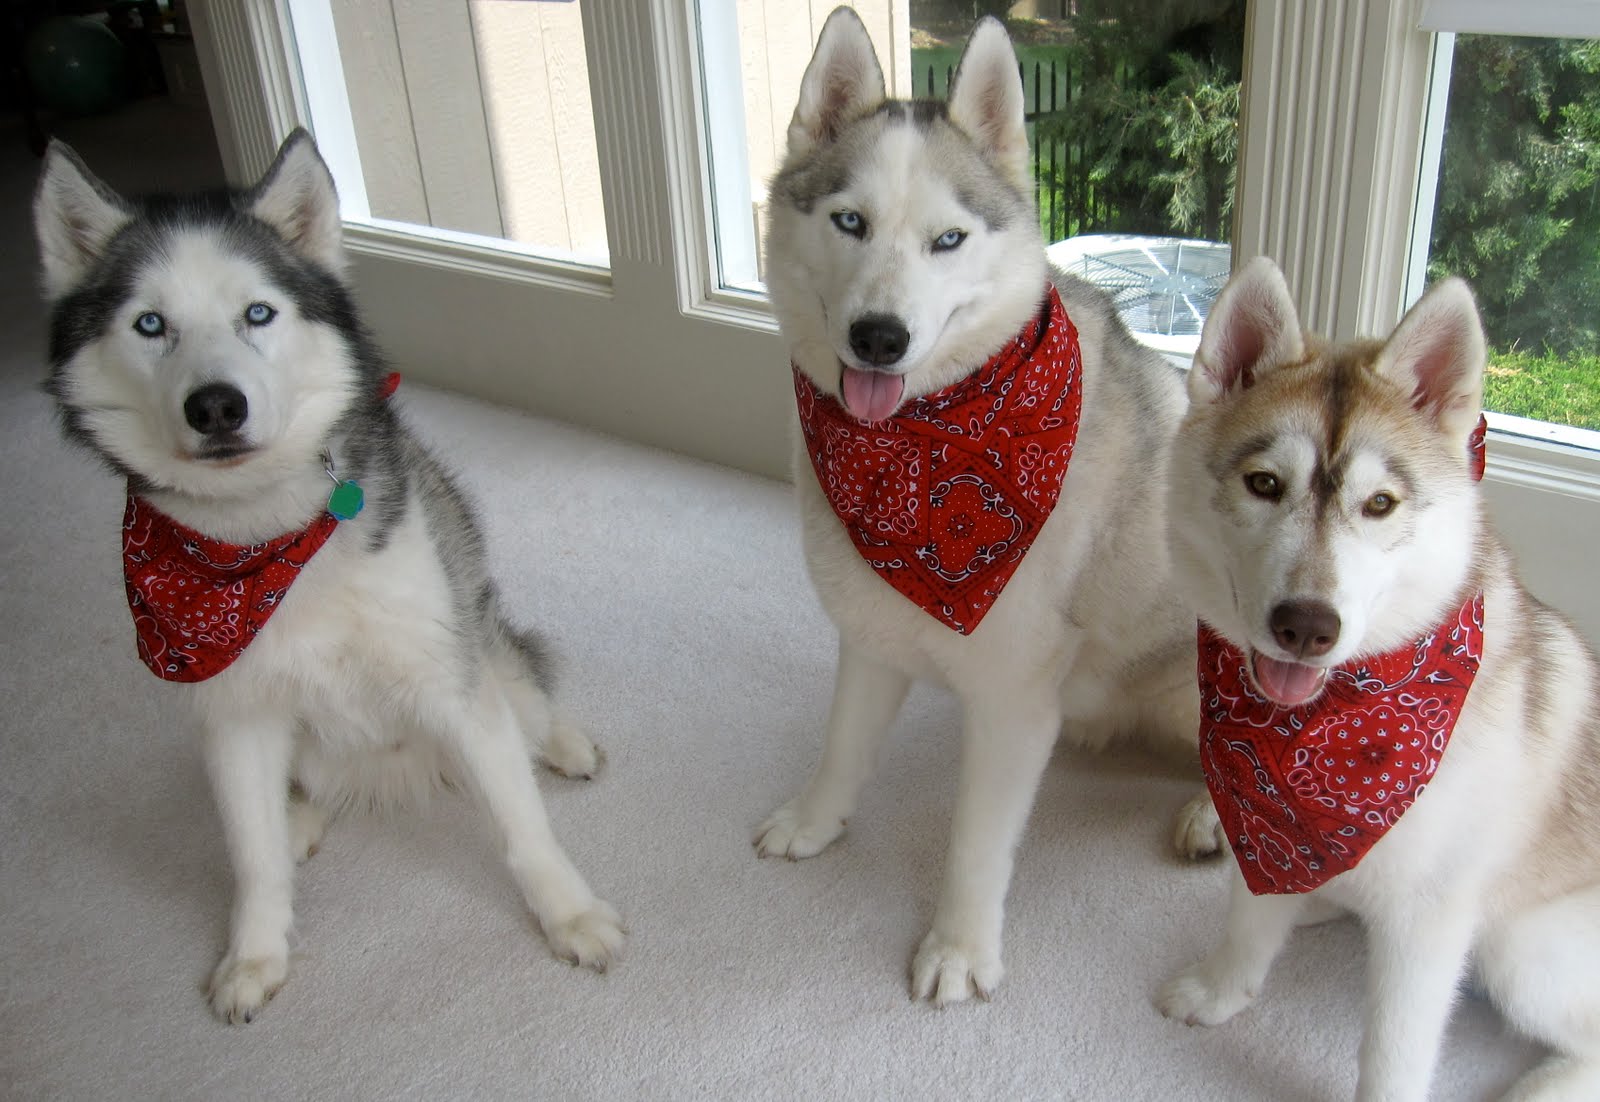 one of the hottest new fashion trends dogs have known all along - bandanas